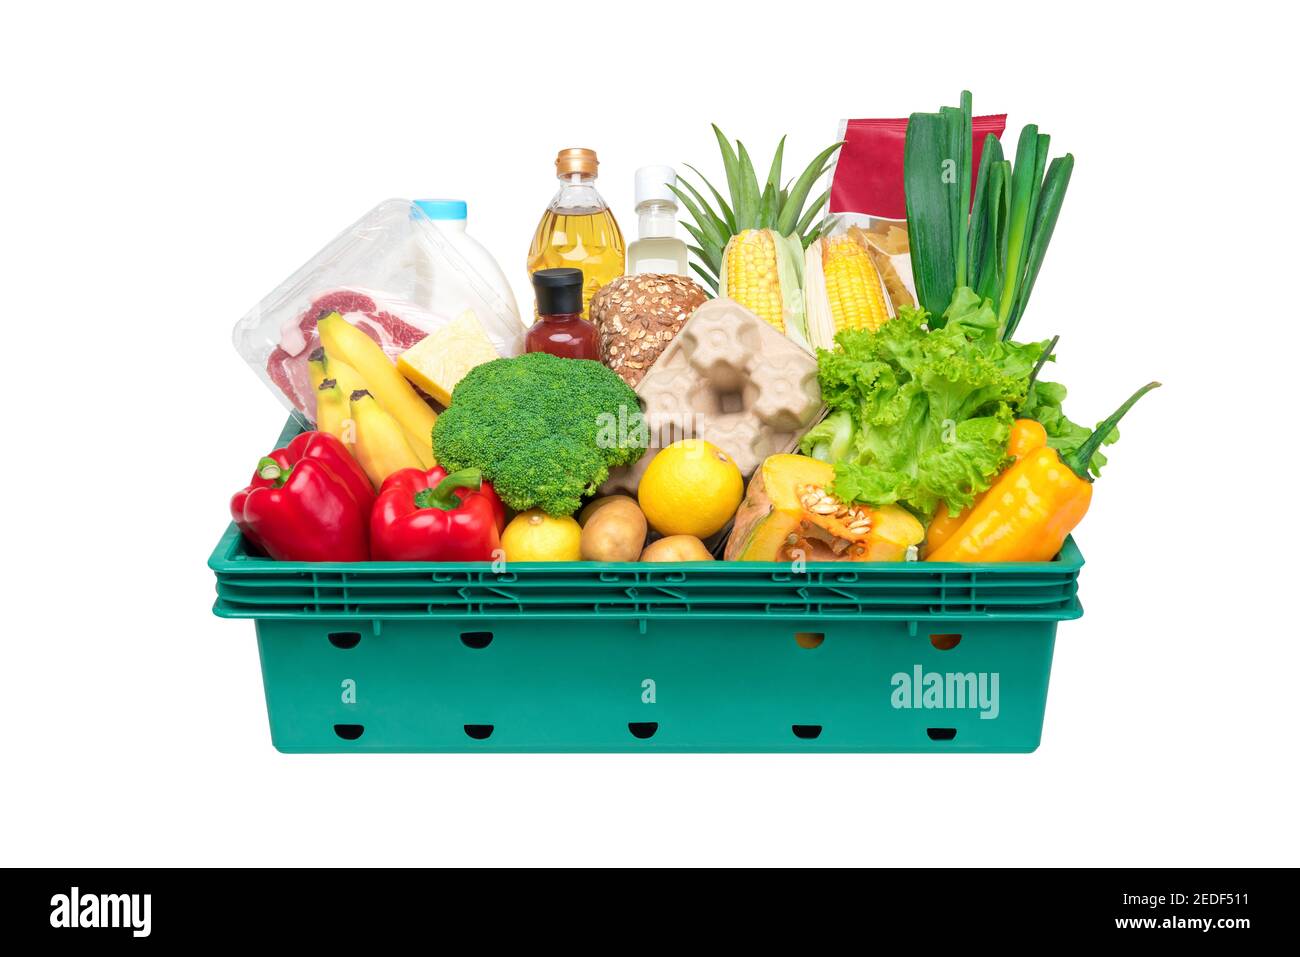 Fresh healthy groceries and vegetables from supermarket in green tray box isolated on white background Stock Photo